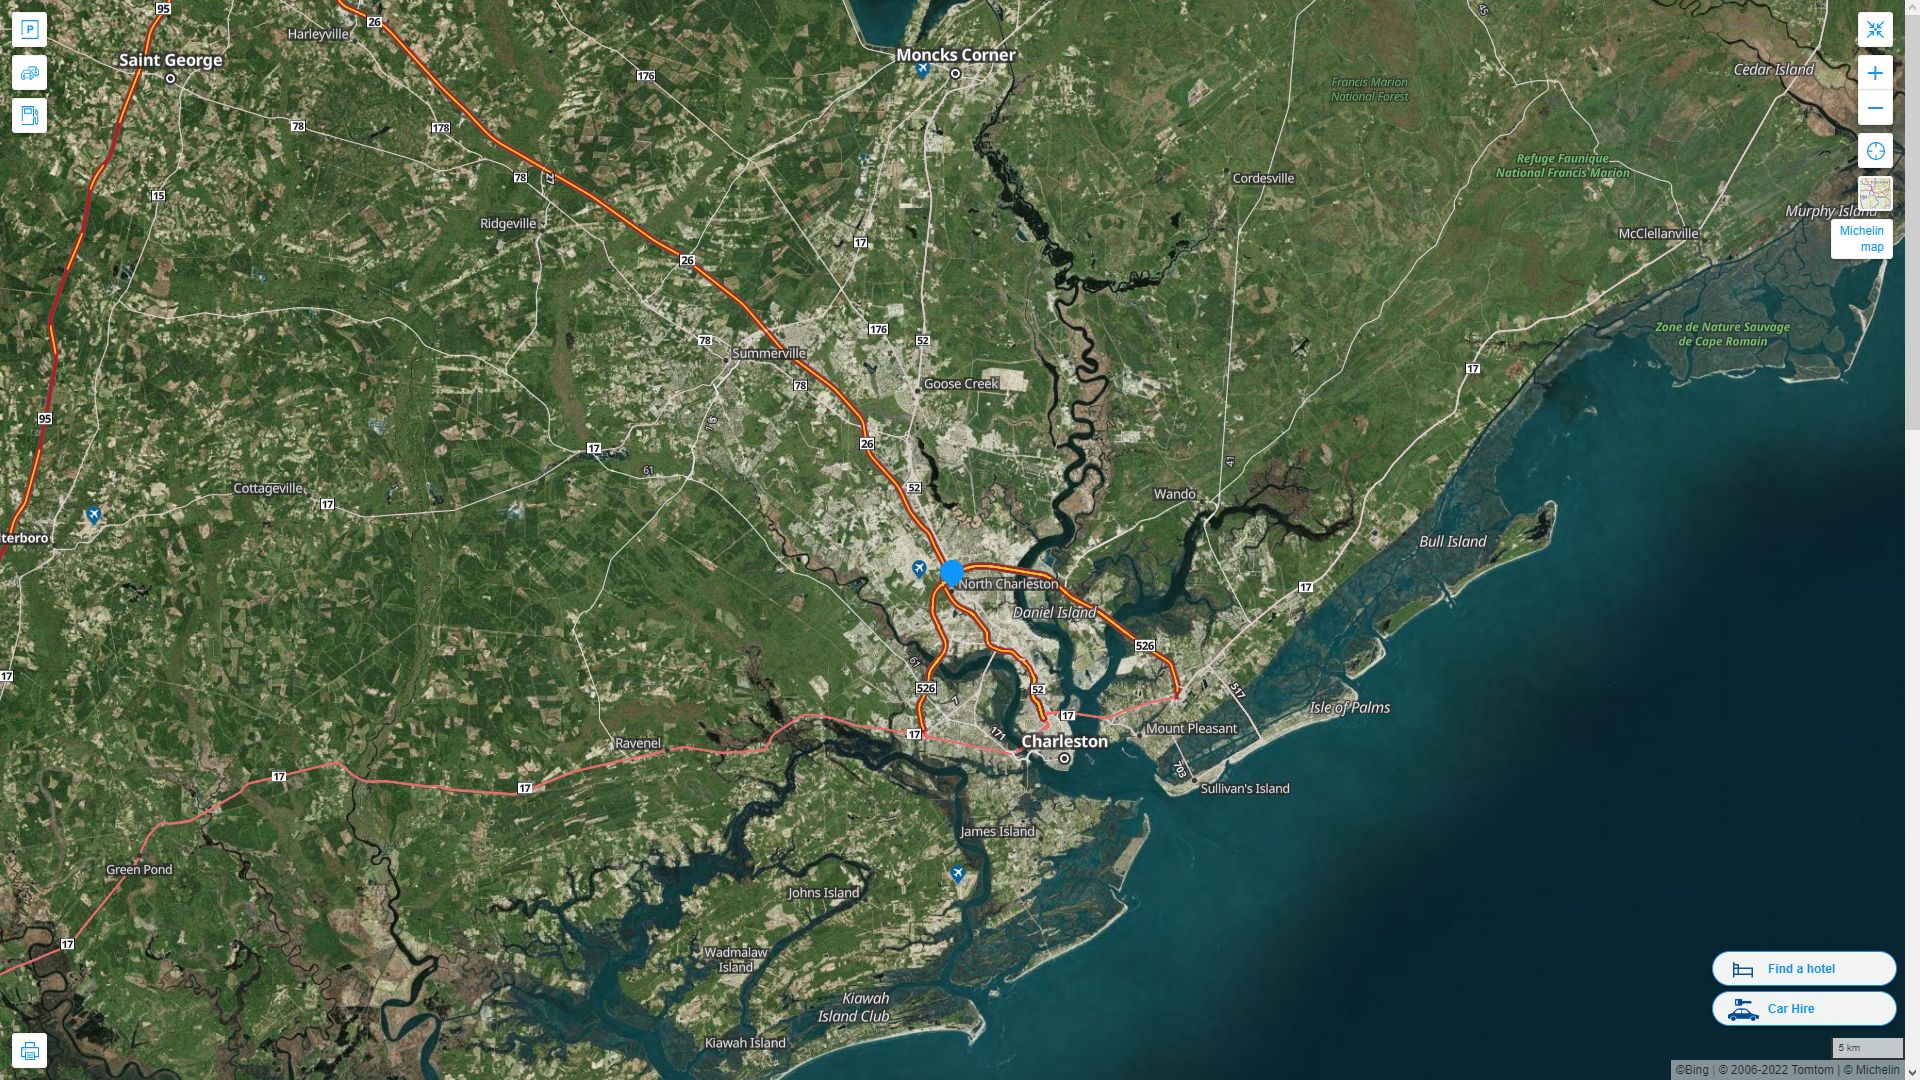 North Charleston South Carolina Highway and Road Map with Satellite View